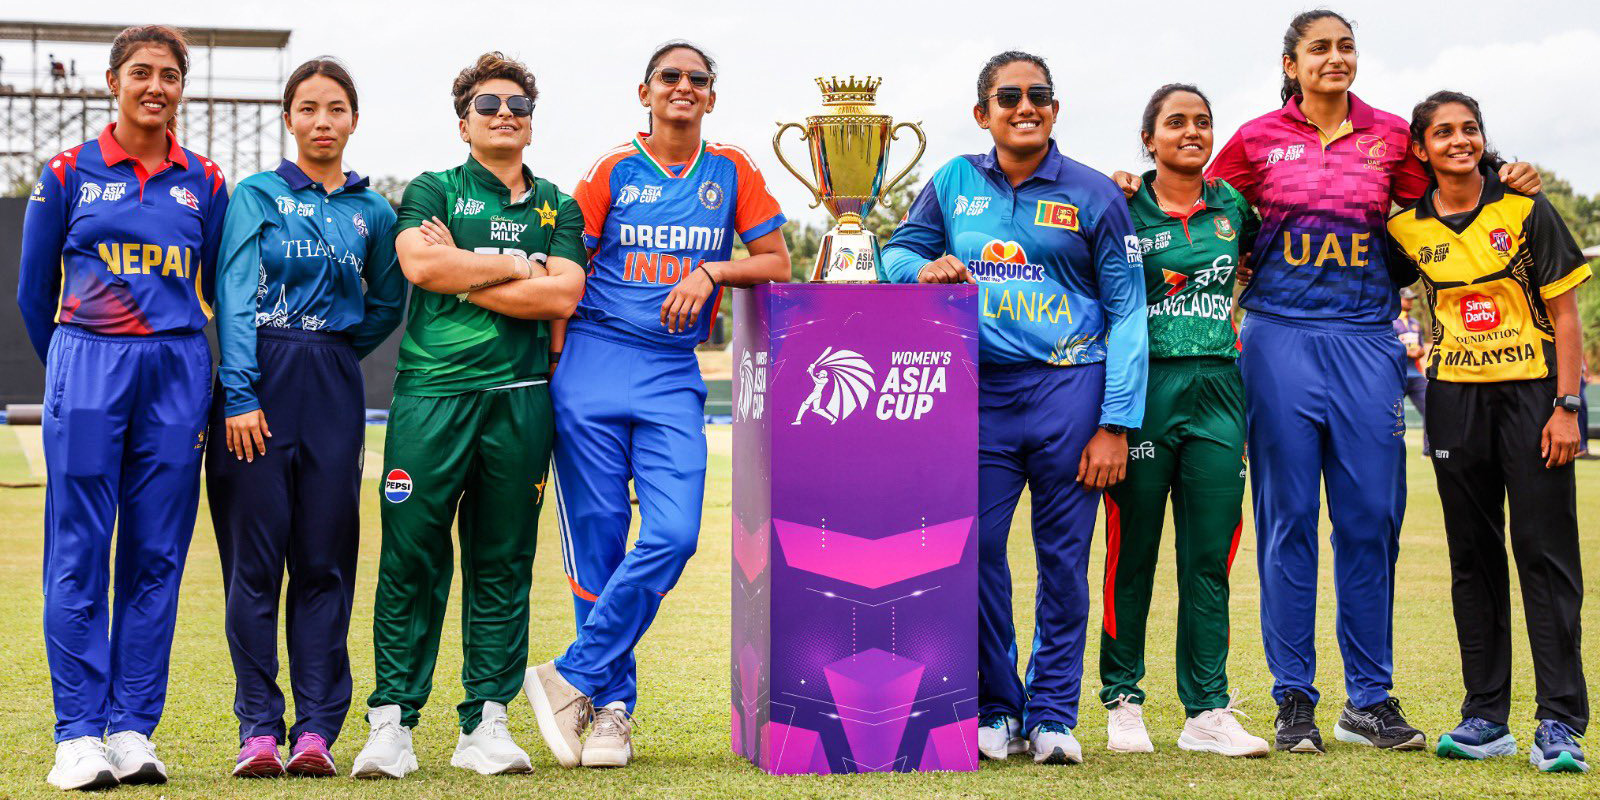 Women’s Asia Cup: All you need to know